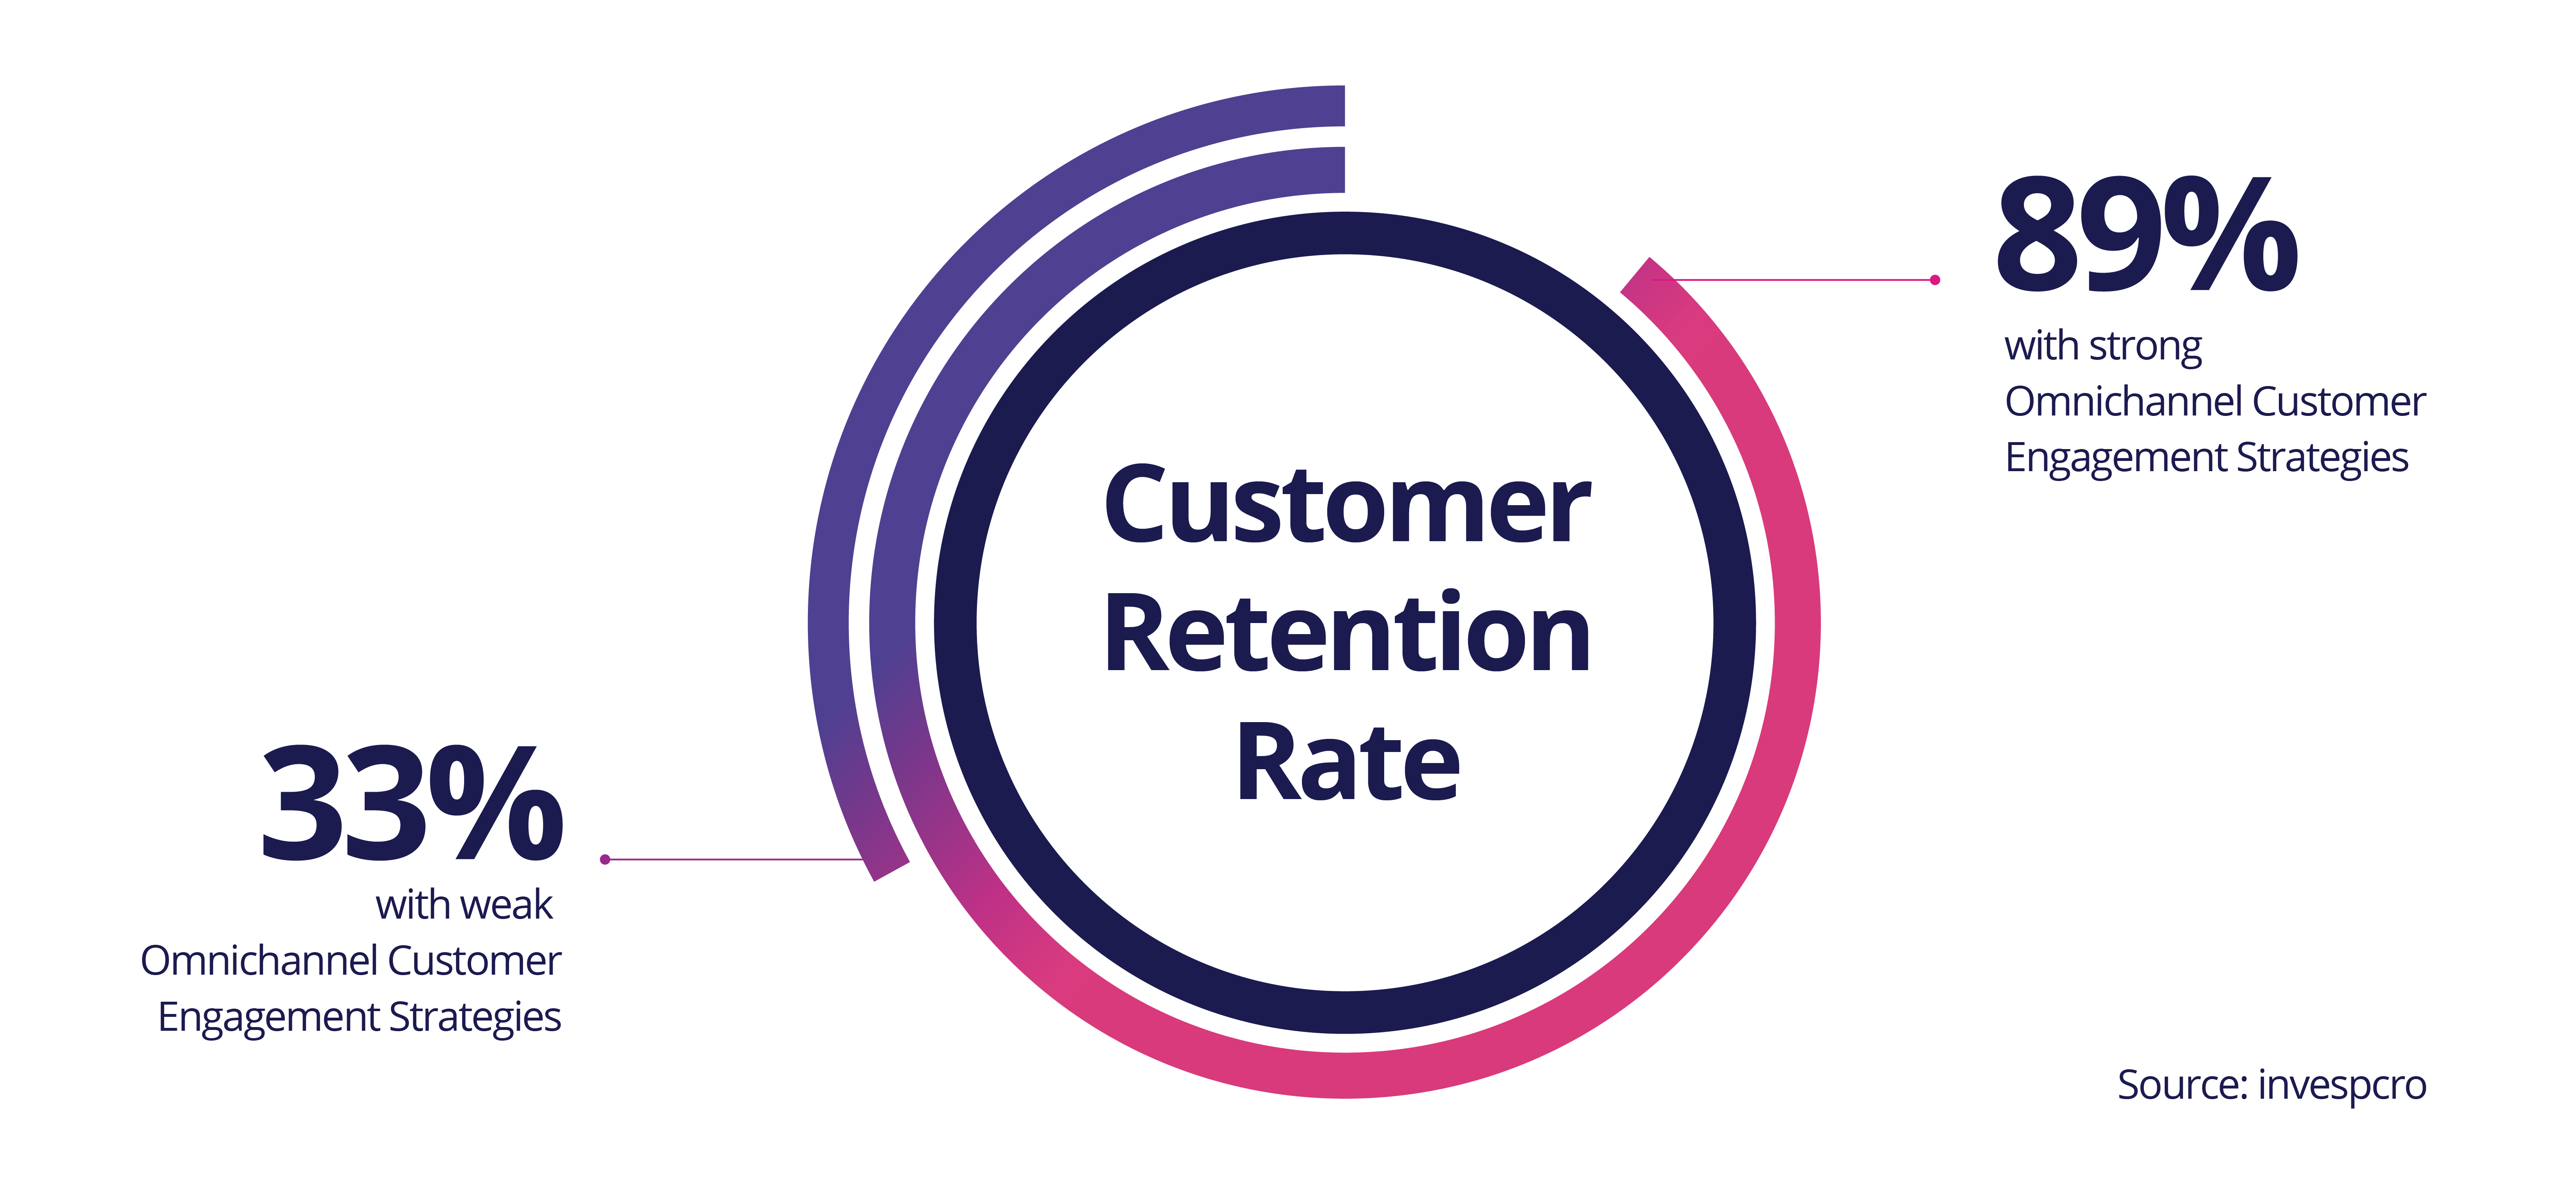 Customer retention by companies with omnichannel strategies compared to those without